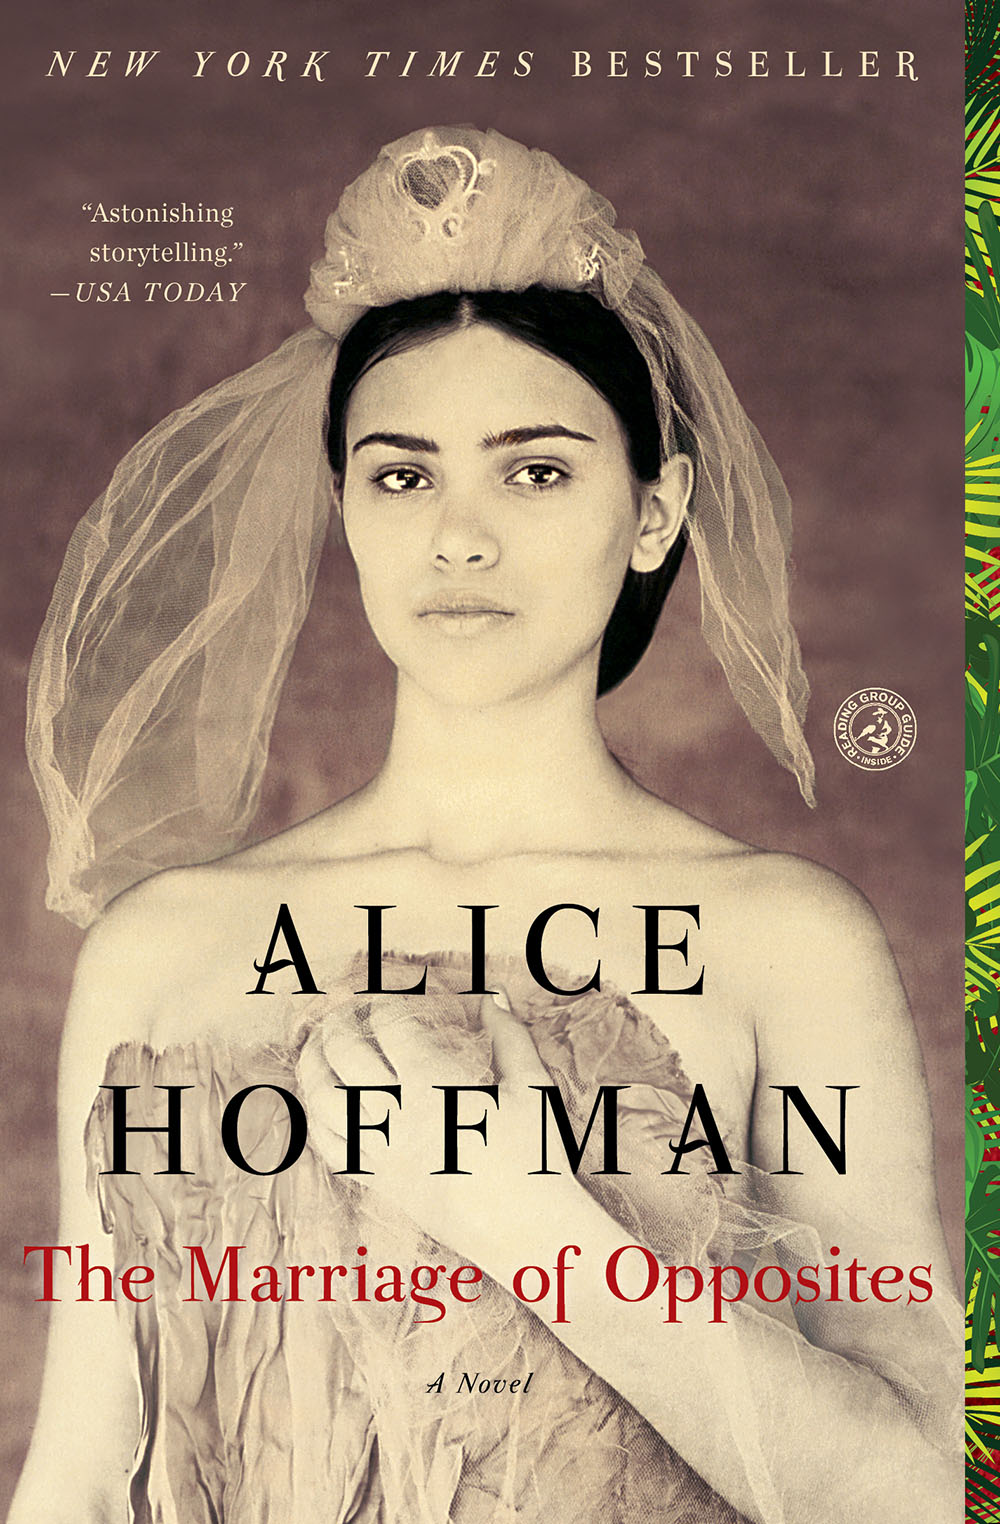 The cover of The Marriage of Opposites by Alice Hoffman